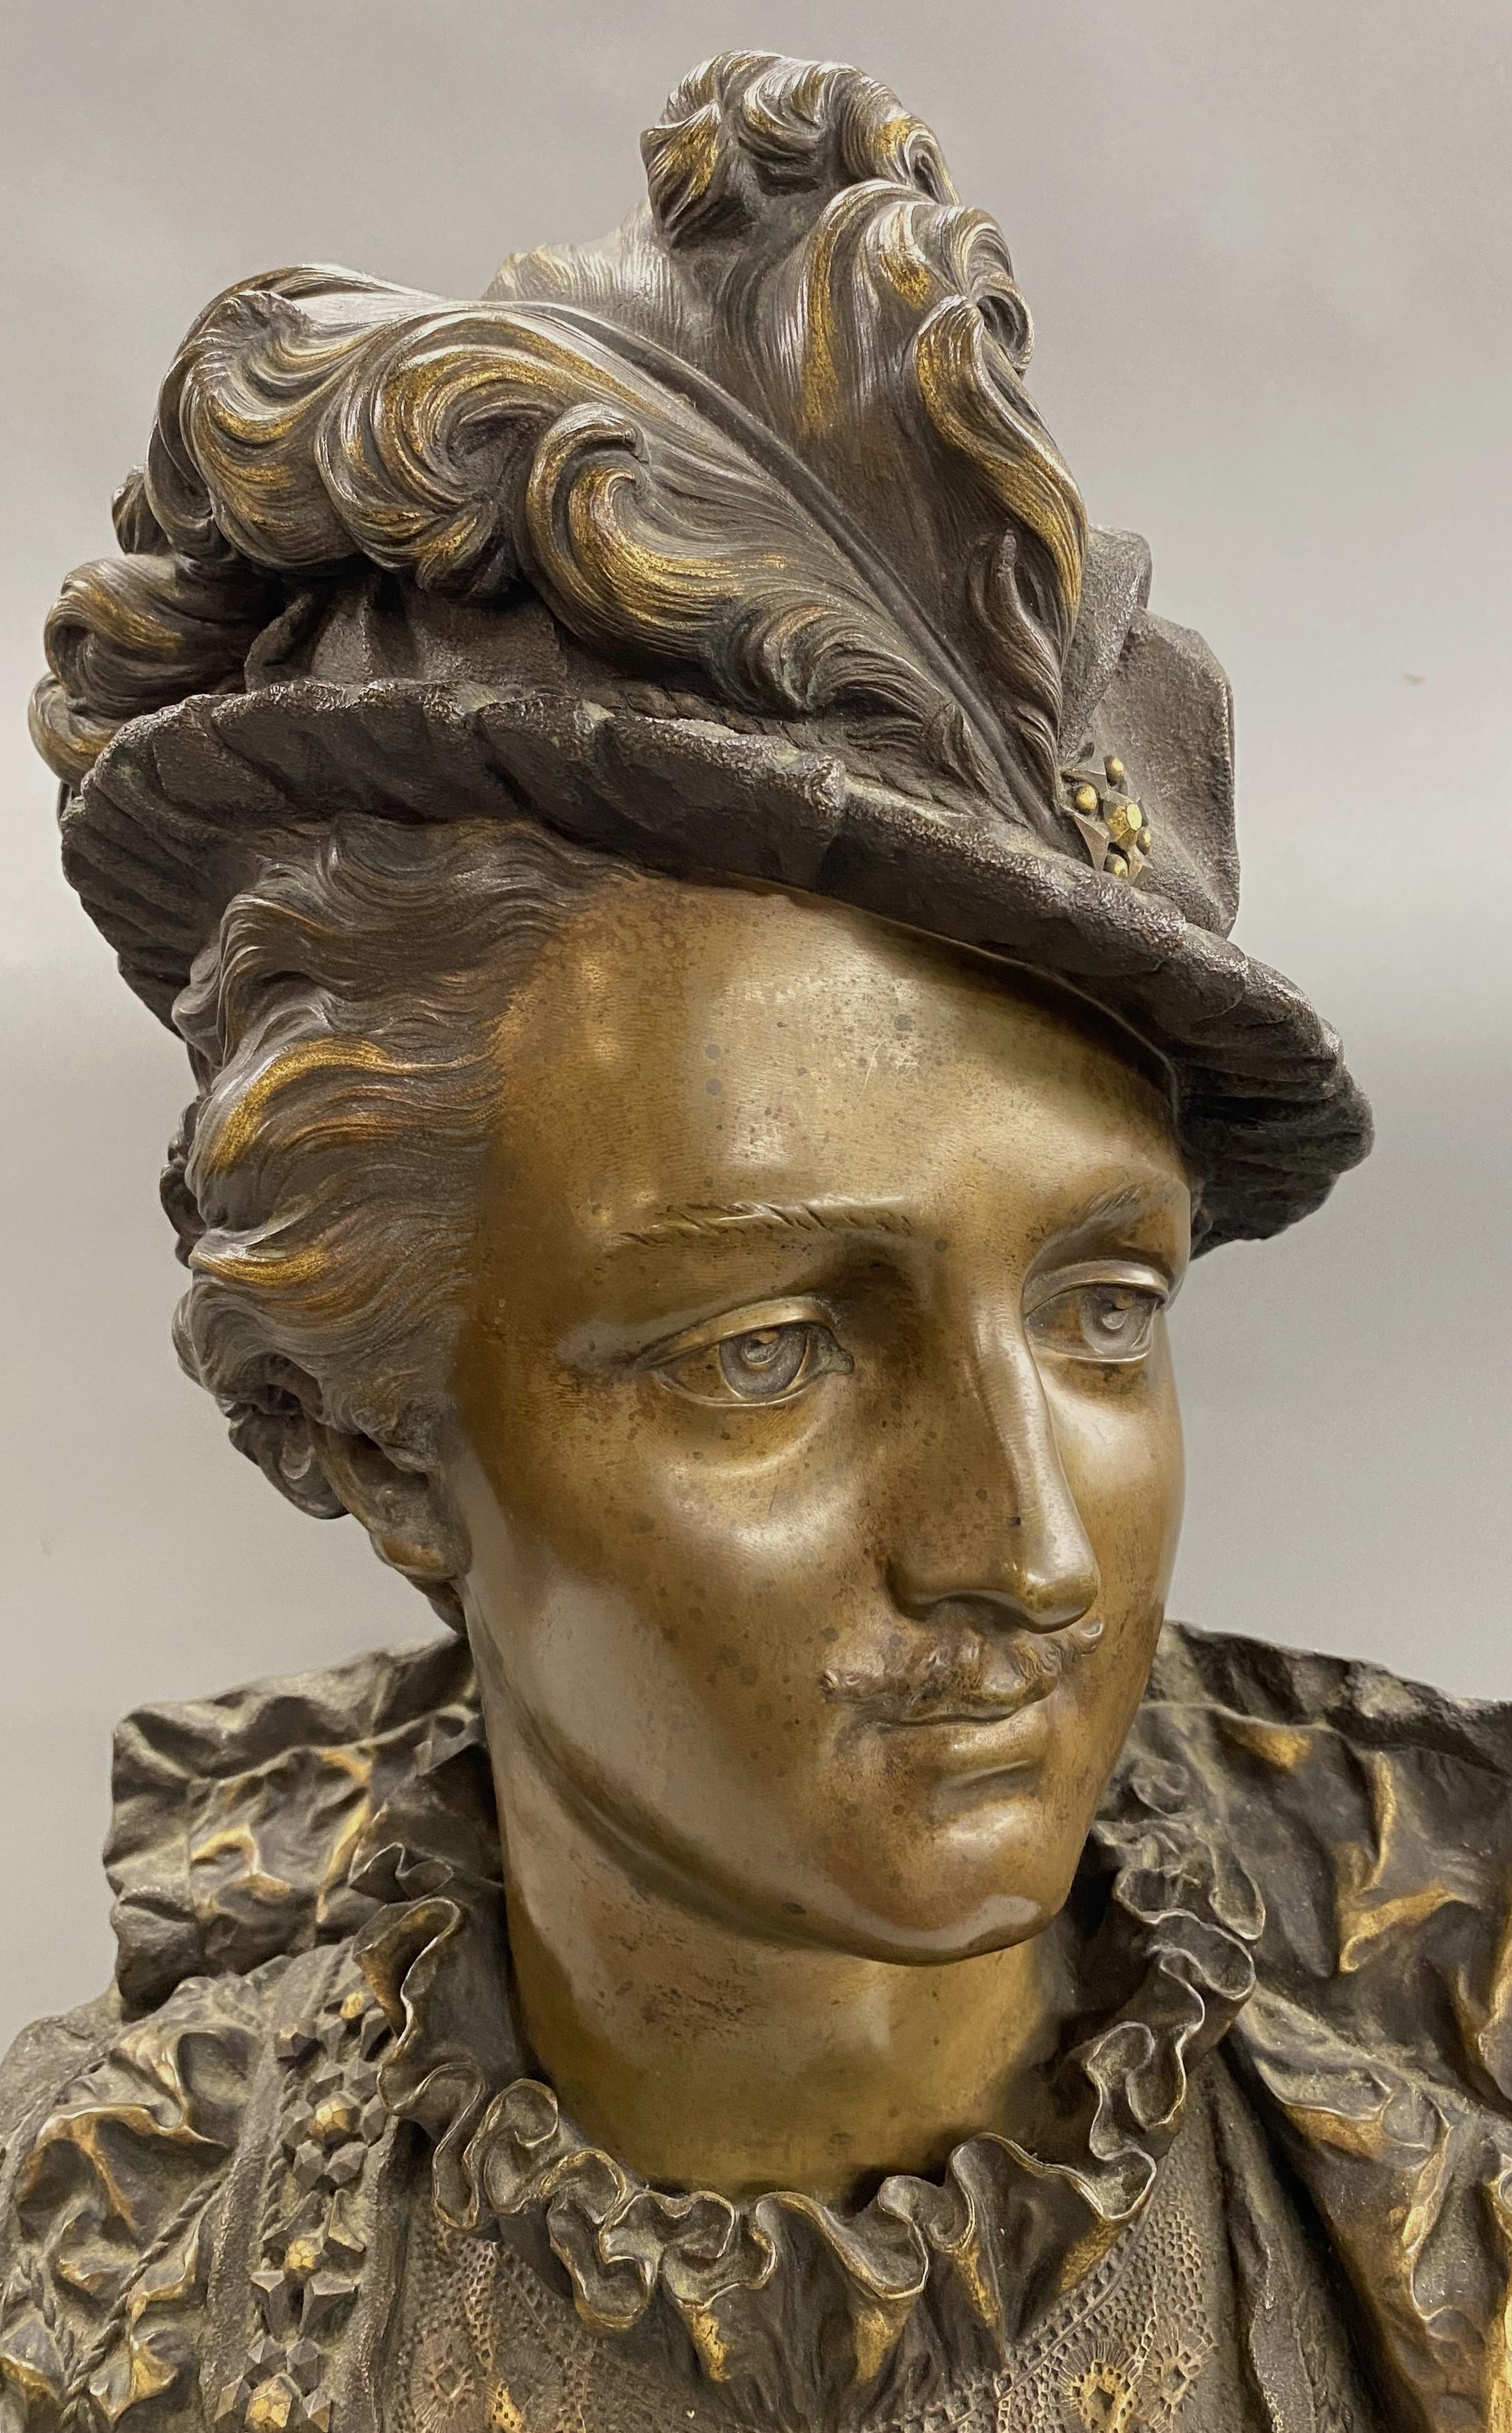 A fine patinated bronze bust of a French nobleman by French sculptor Ernest Rancoulet (1870-1915). Rancoulet was born in Bordeaux, France and was best known for his Neoclassical bronze figures of mythological creatures, society women, and athletes.